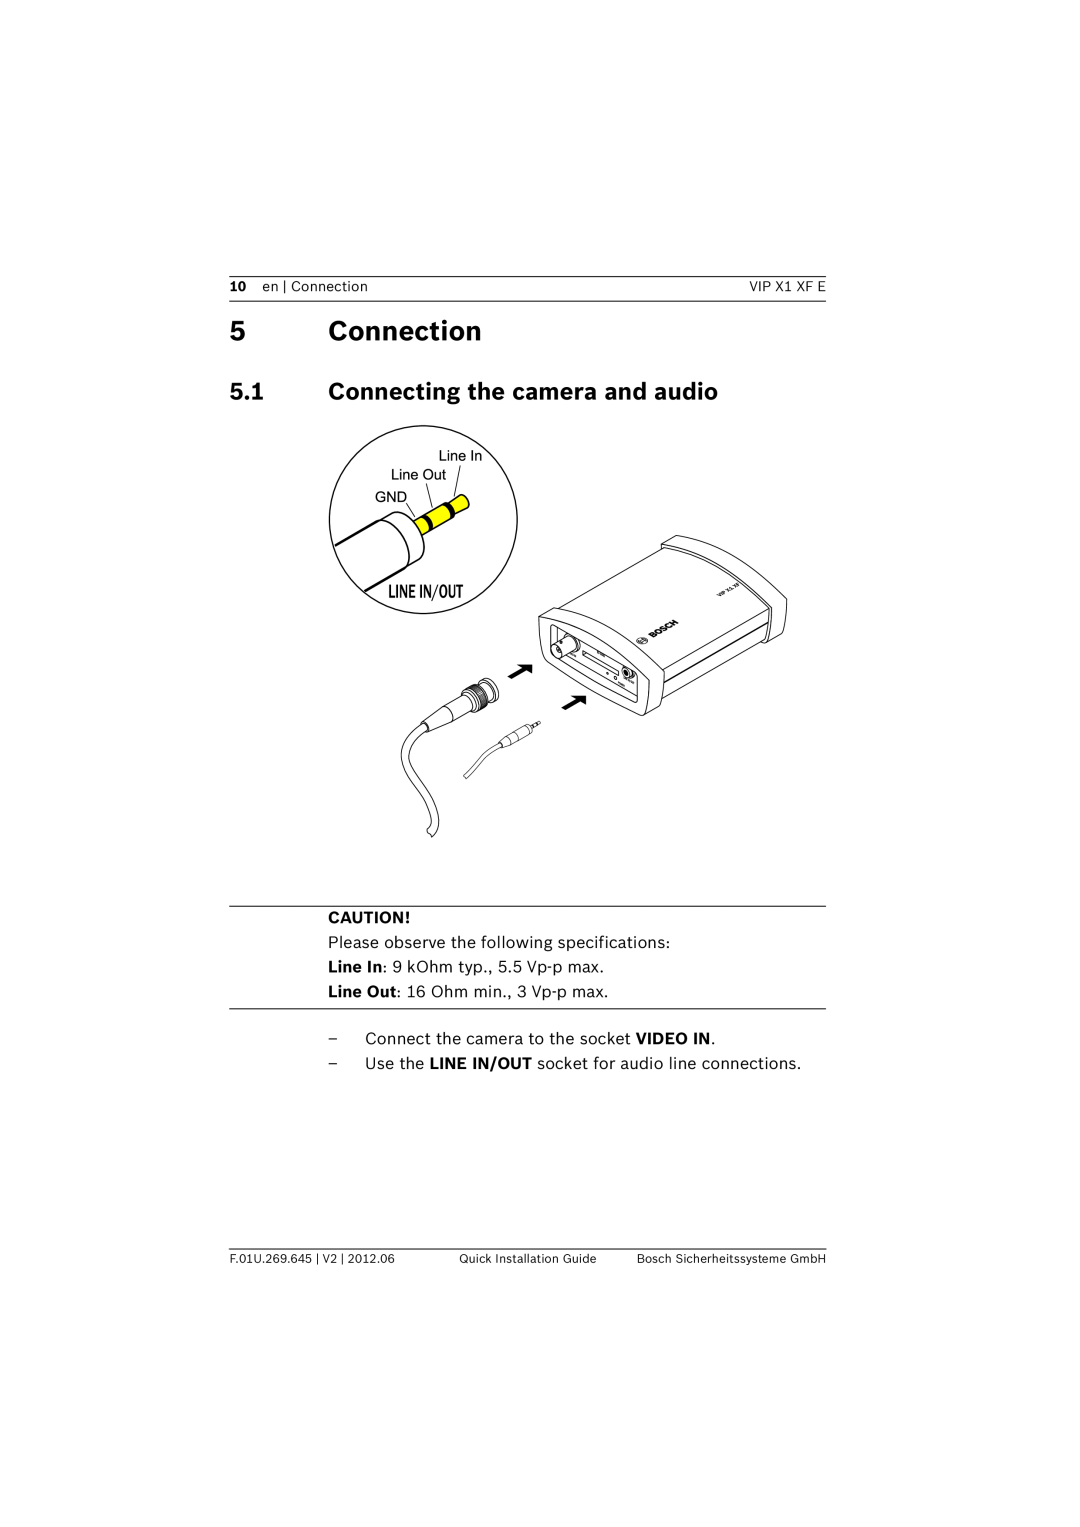 Bosch Appliances VIP X1 XF E manual 5Connection, 5.1Connecting the camera and audio, en Connection, F.01U.269.645 | V2 